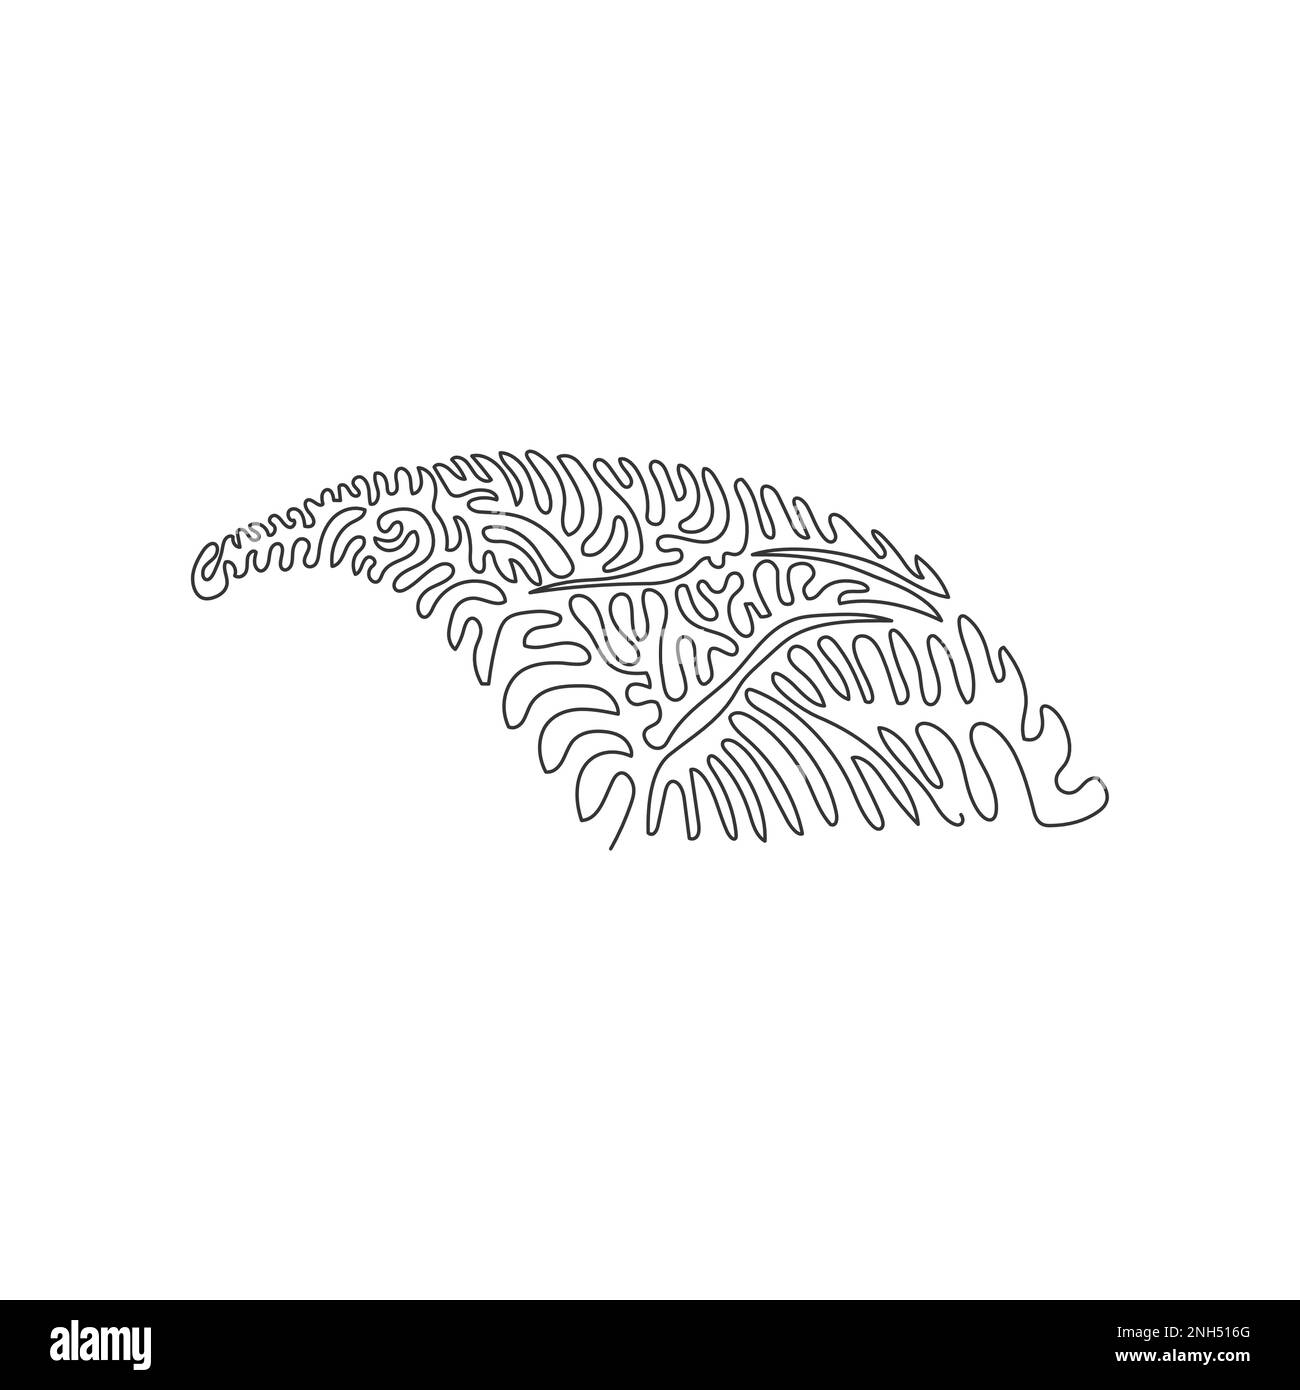 Single one line drawing of long snouted anteater. Continuous line graphic design vector illustration of long heads mammal Stock Vector